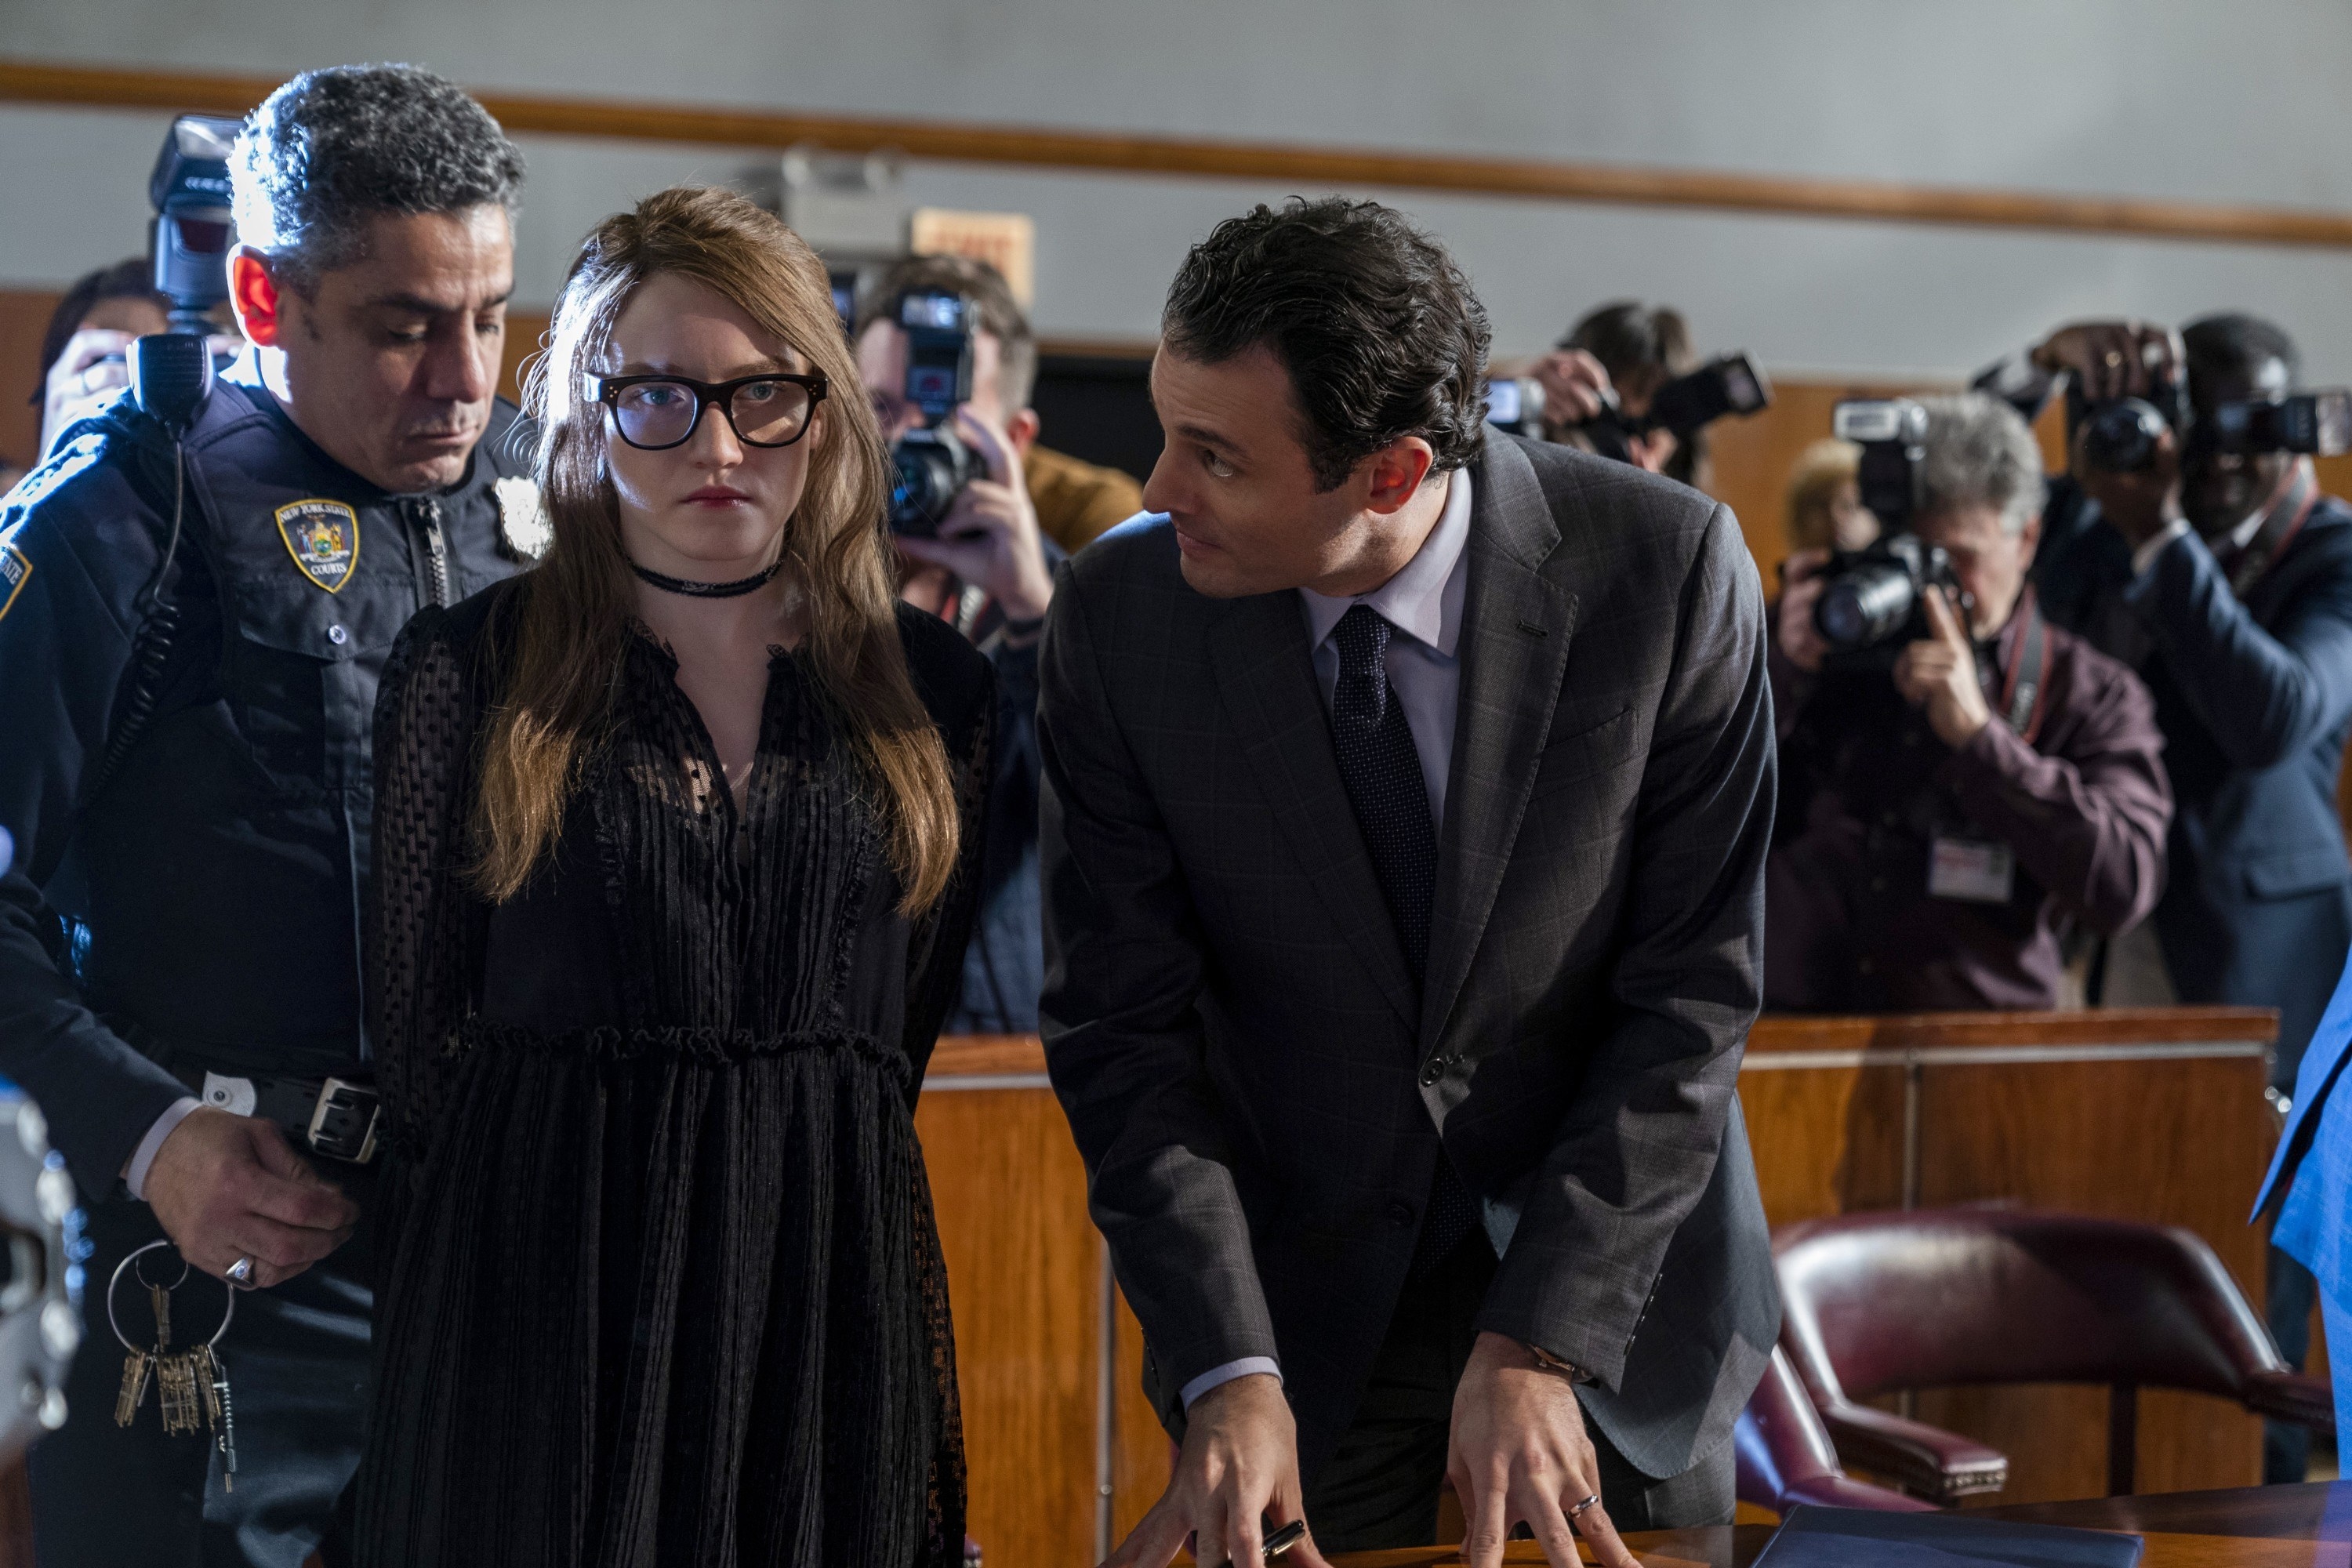 dressed in a long-sleeved babydoll dress, Anna is handcuffed in court